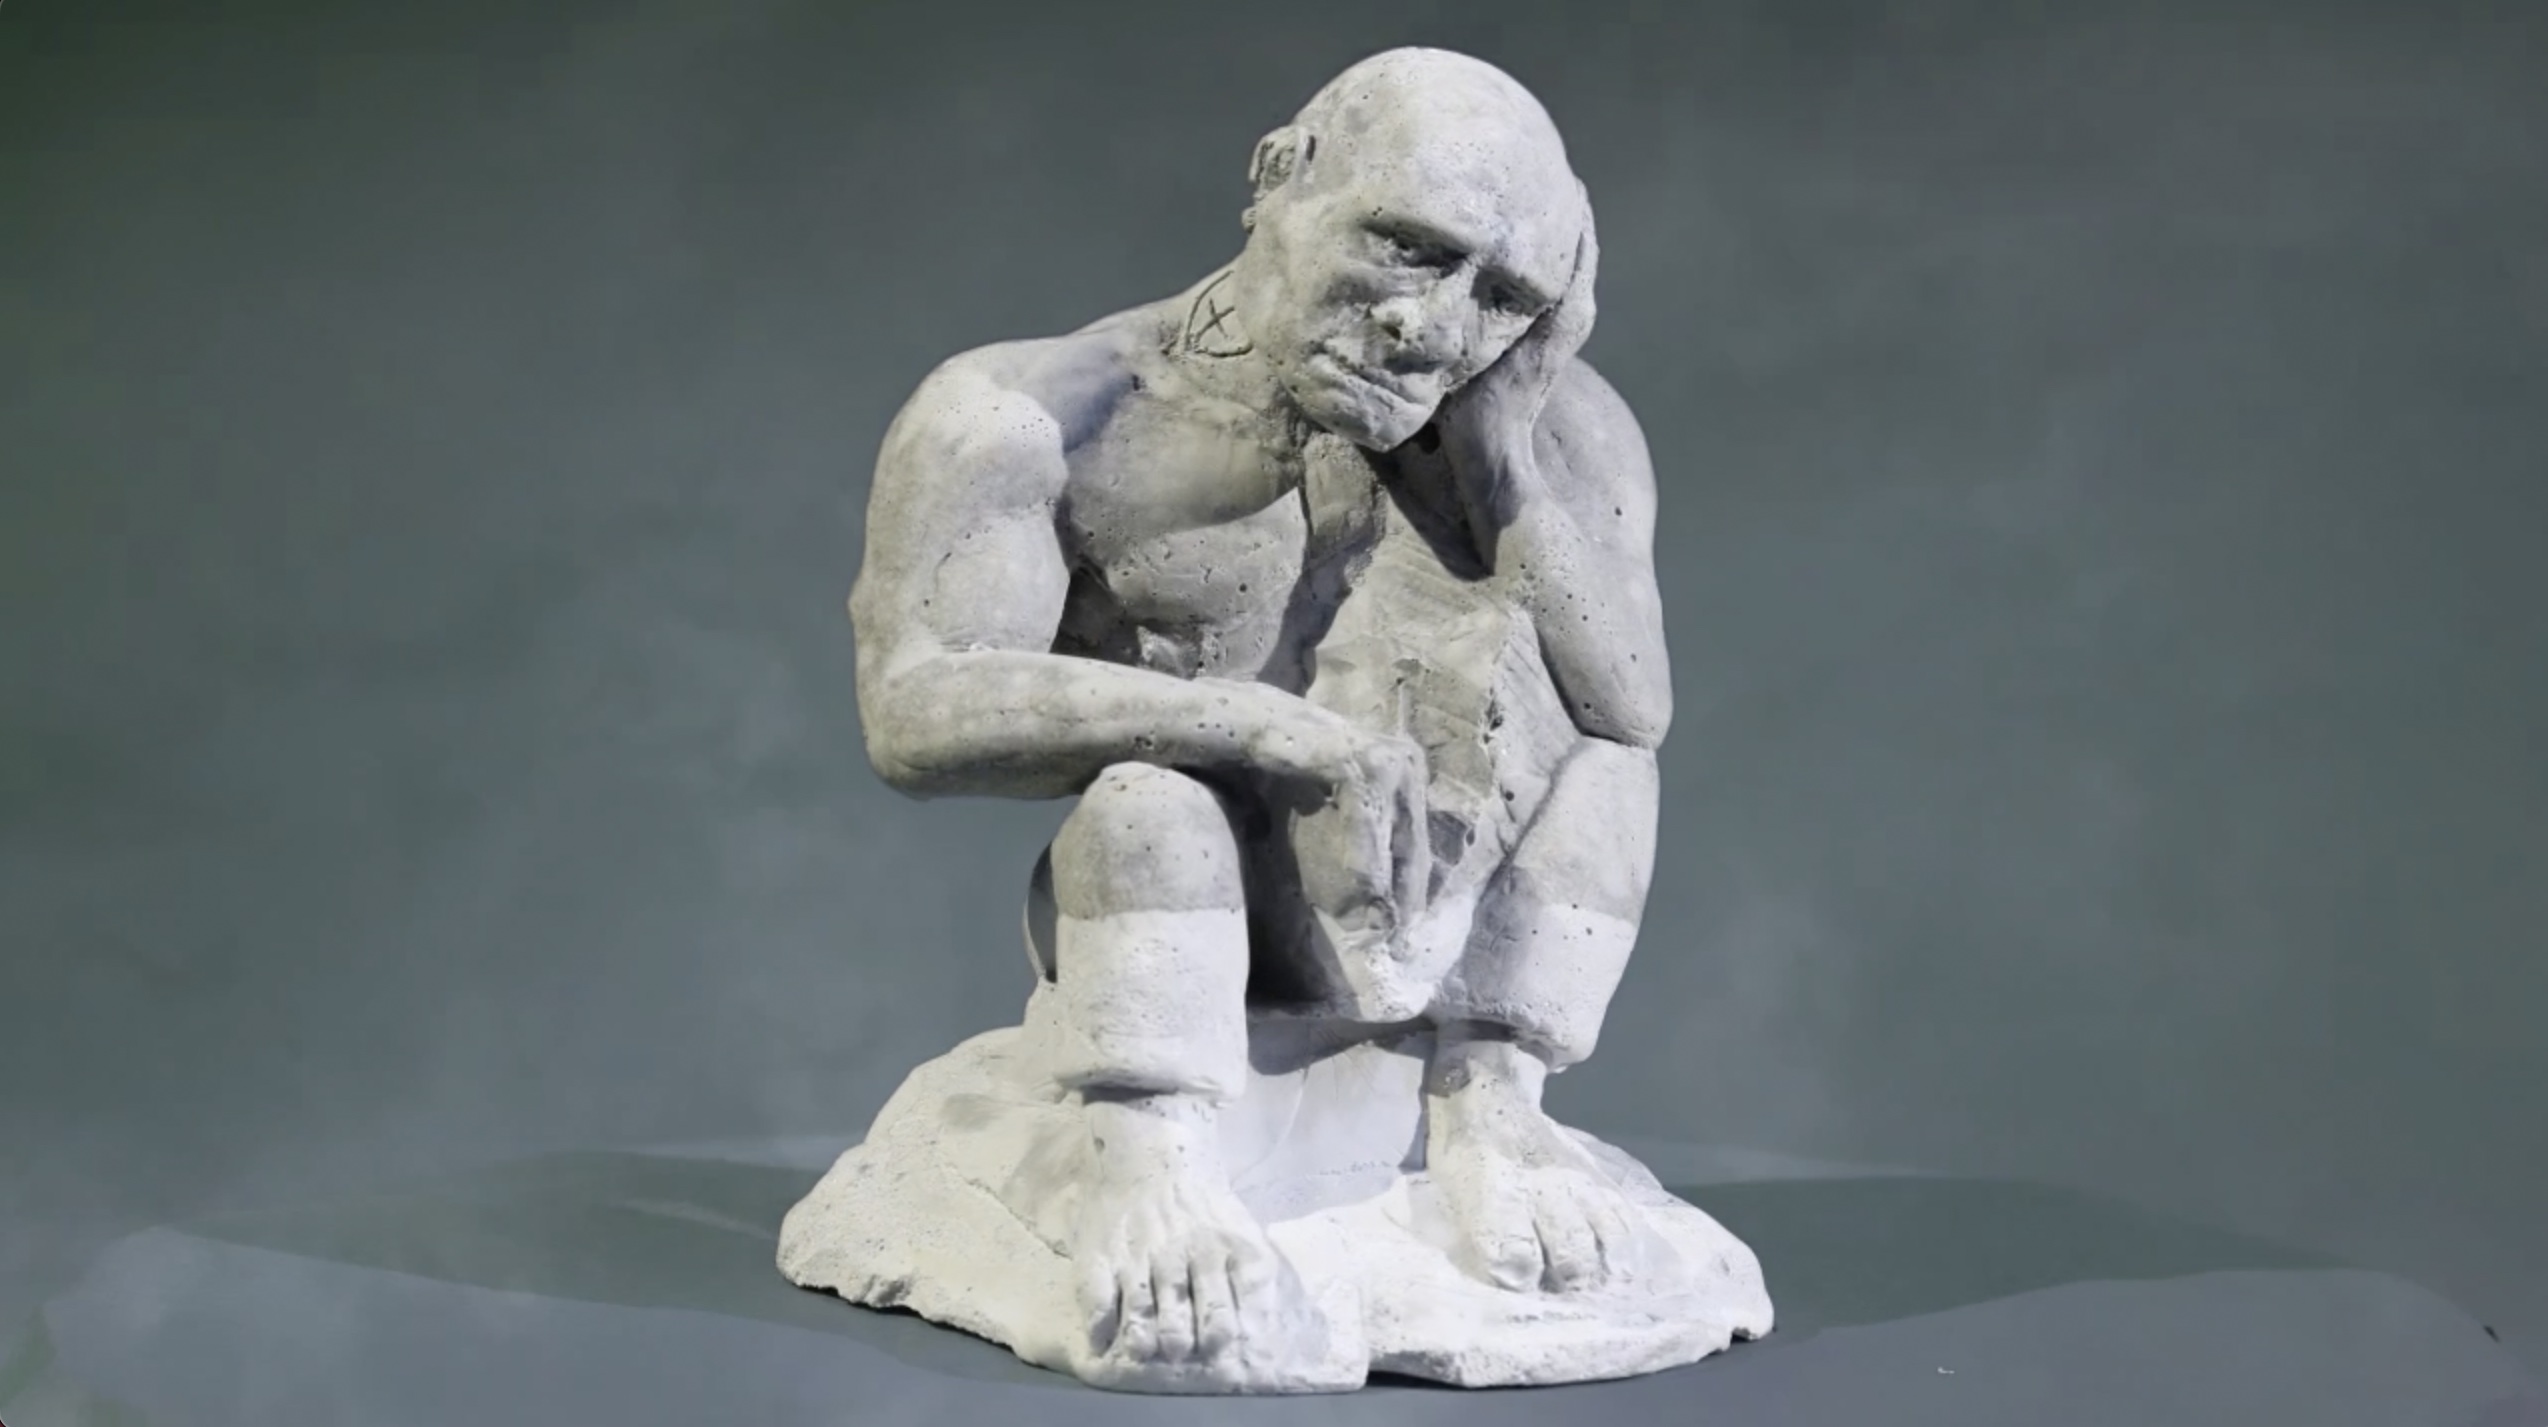 A turnaround of a sculpture by Joseph Xotta, showing a man with his head in his hand in sorrow.